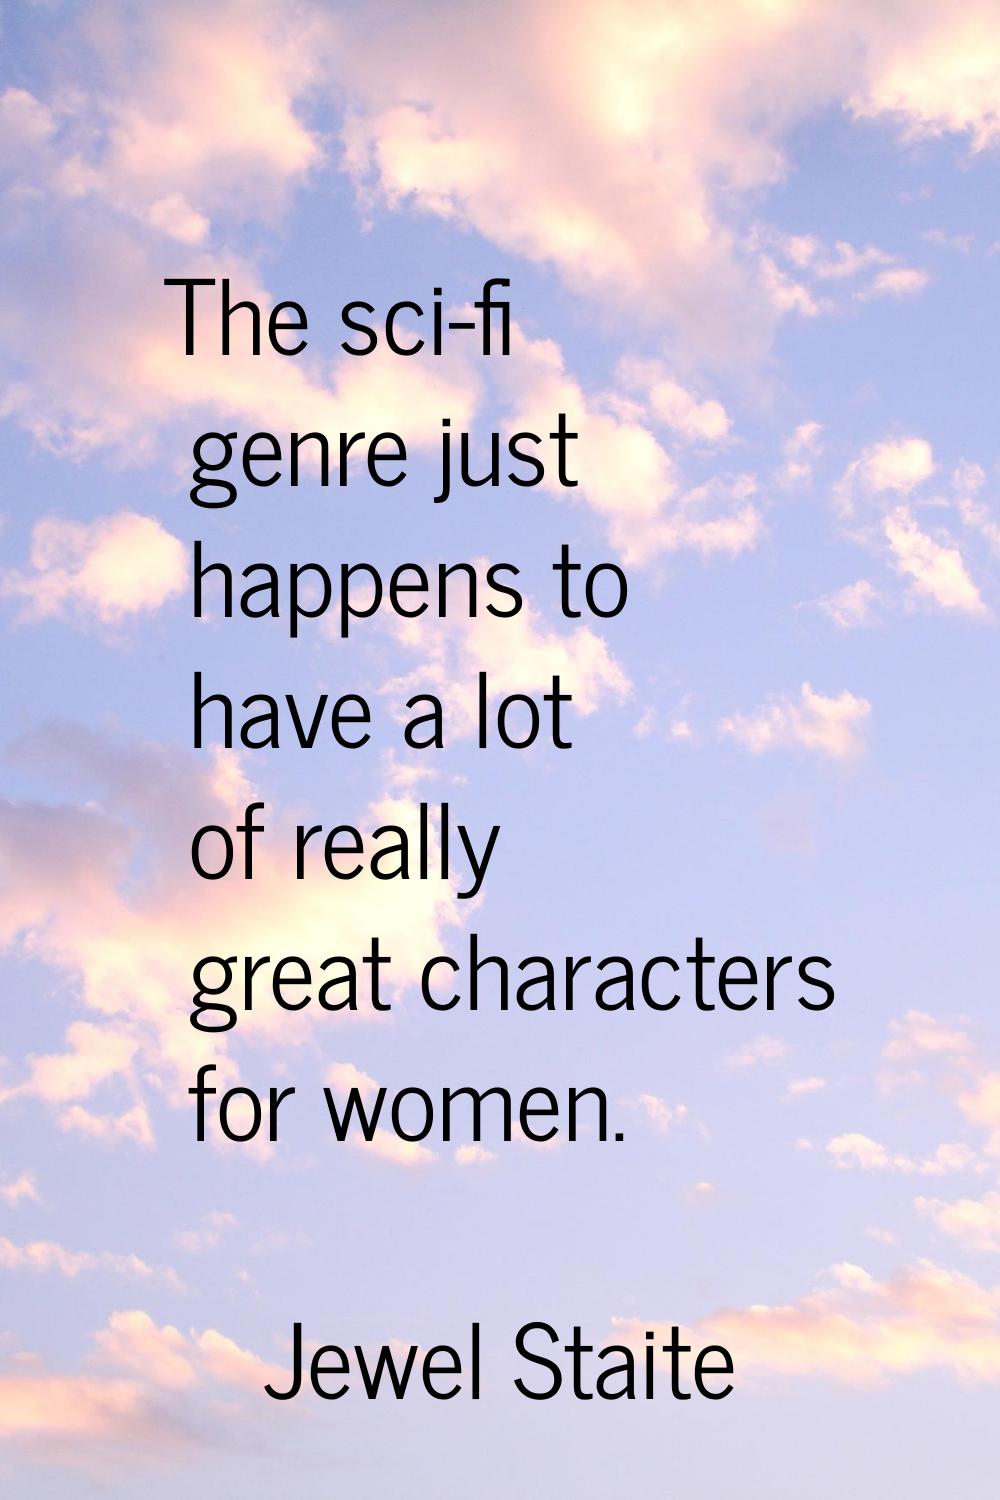 The sci-fi genre just happens to have a lot of really great characters for women.